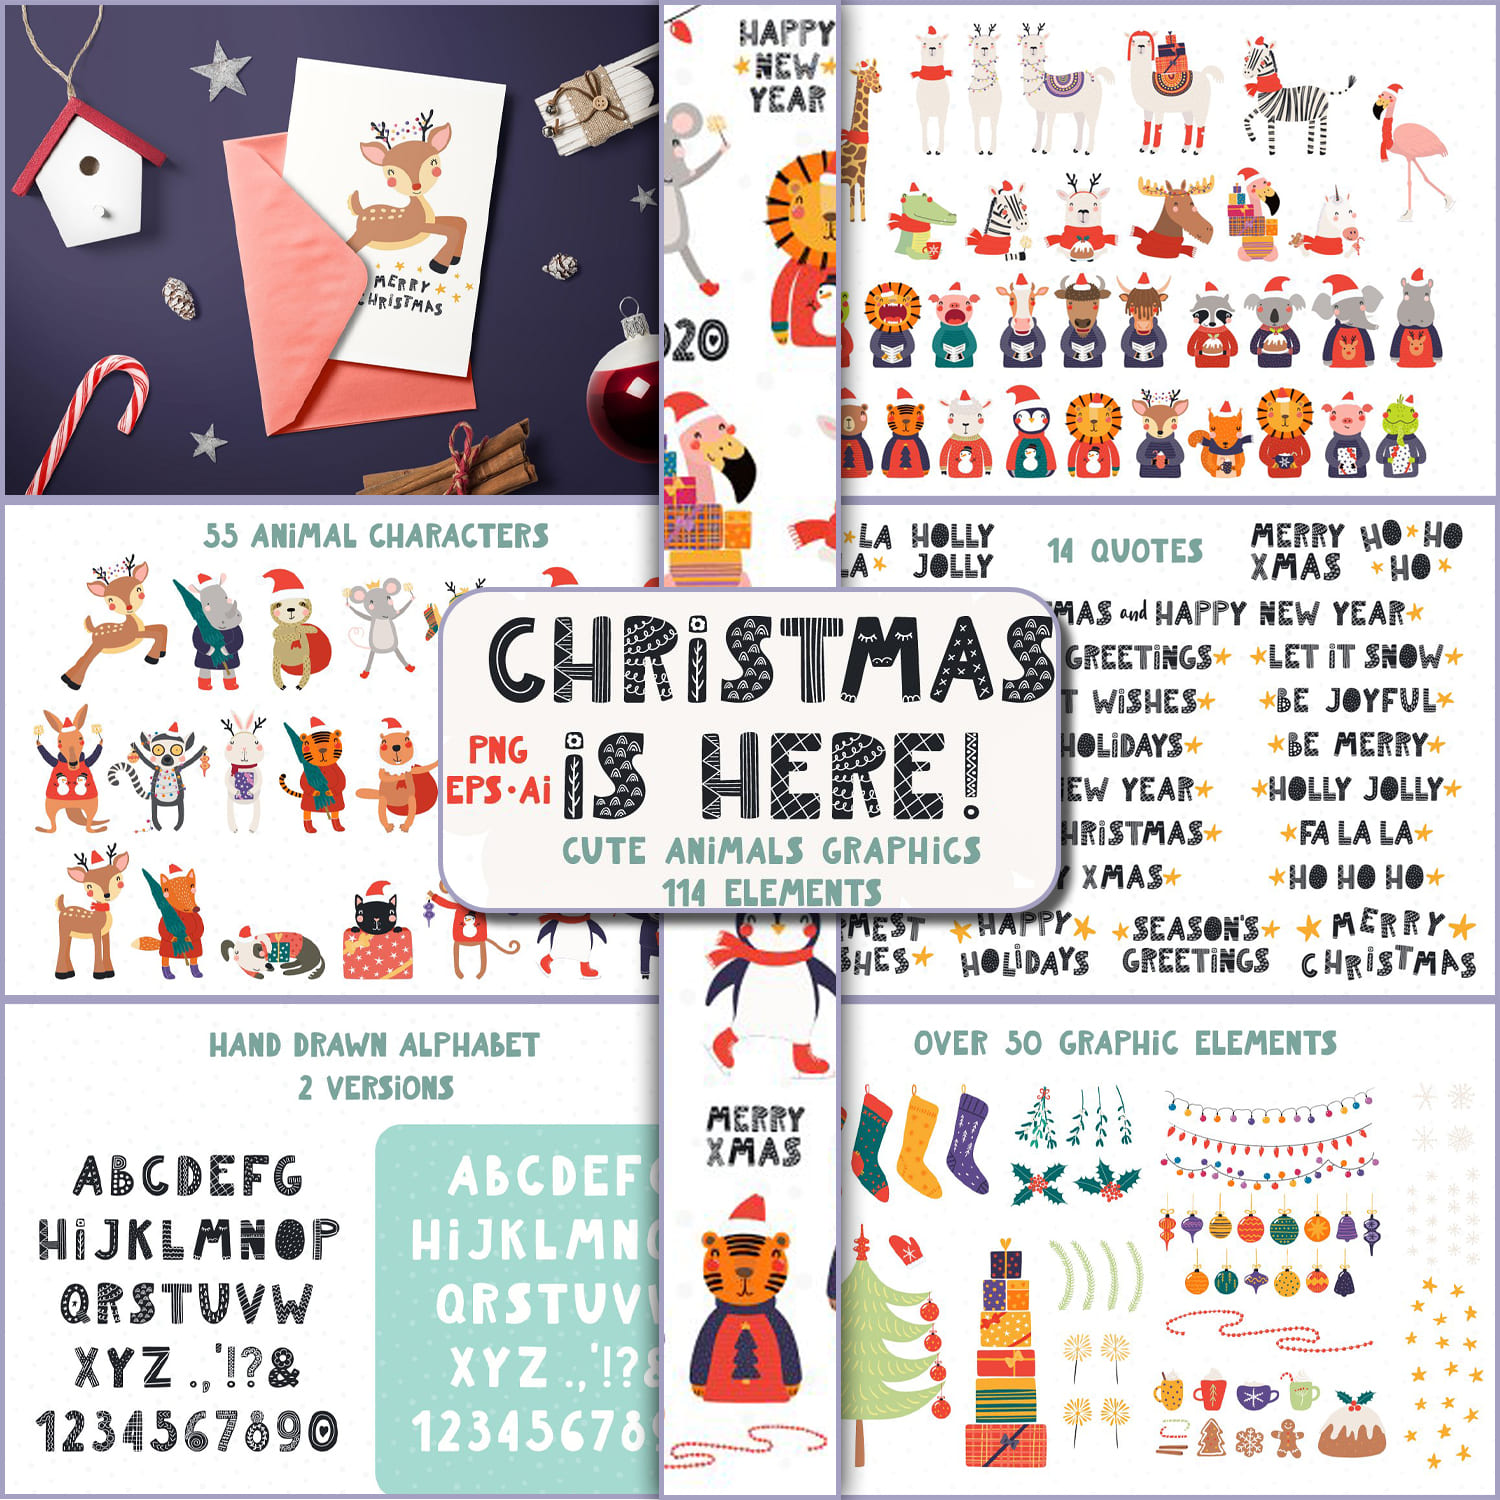 Christmas Is Here, Cute Graphics cover.